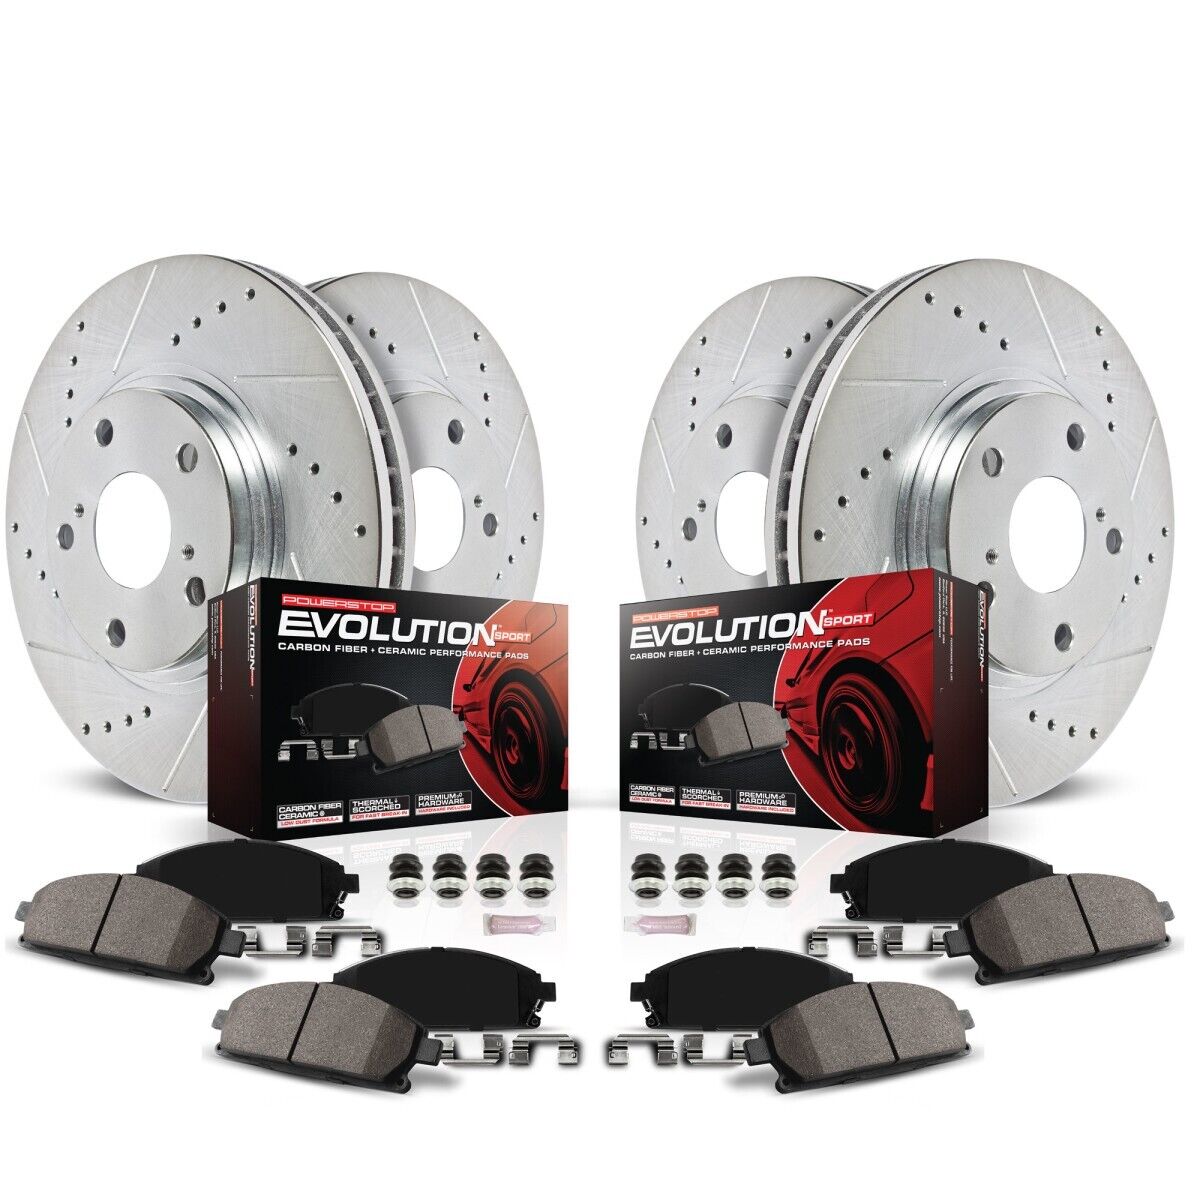 K4152 Powerstop 4-Wheel Set Brake Disc and Pad Kits Front & Rear for Firebird